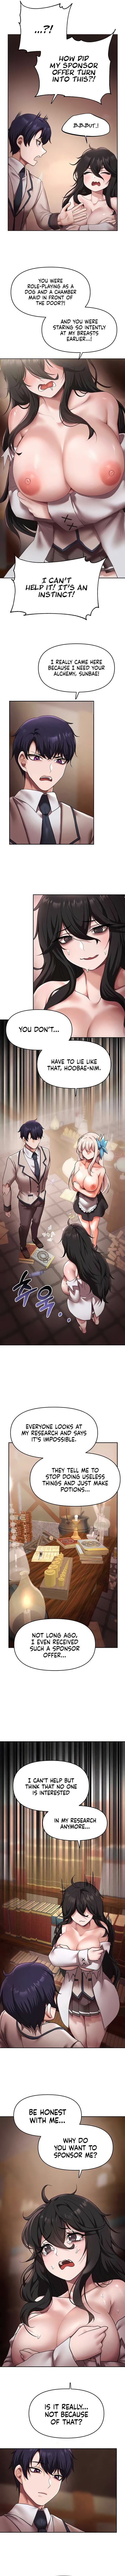 For Sale: Fallen Lady, Never Used - Chapter 13 Page 6